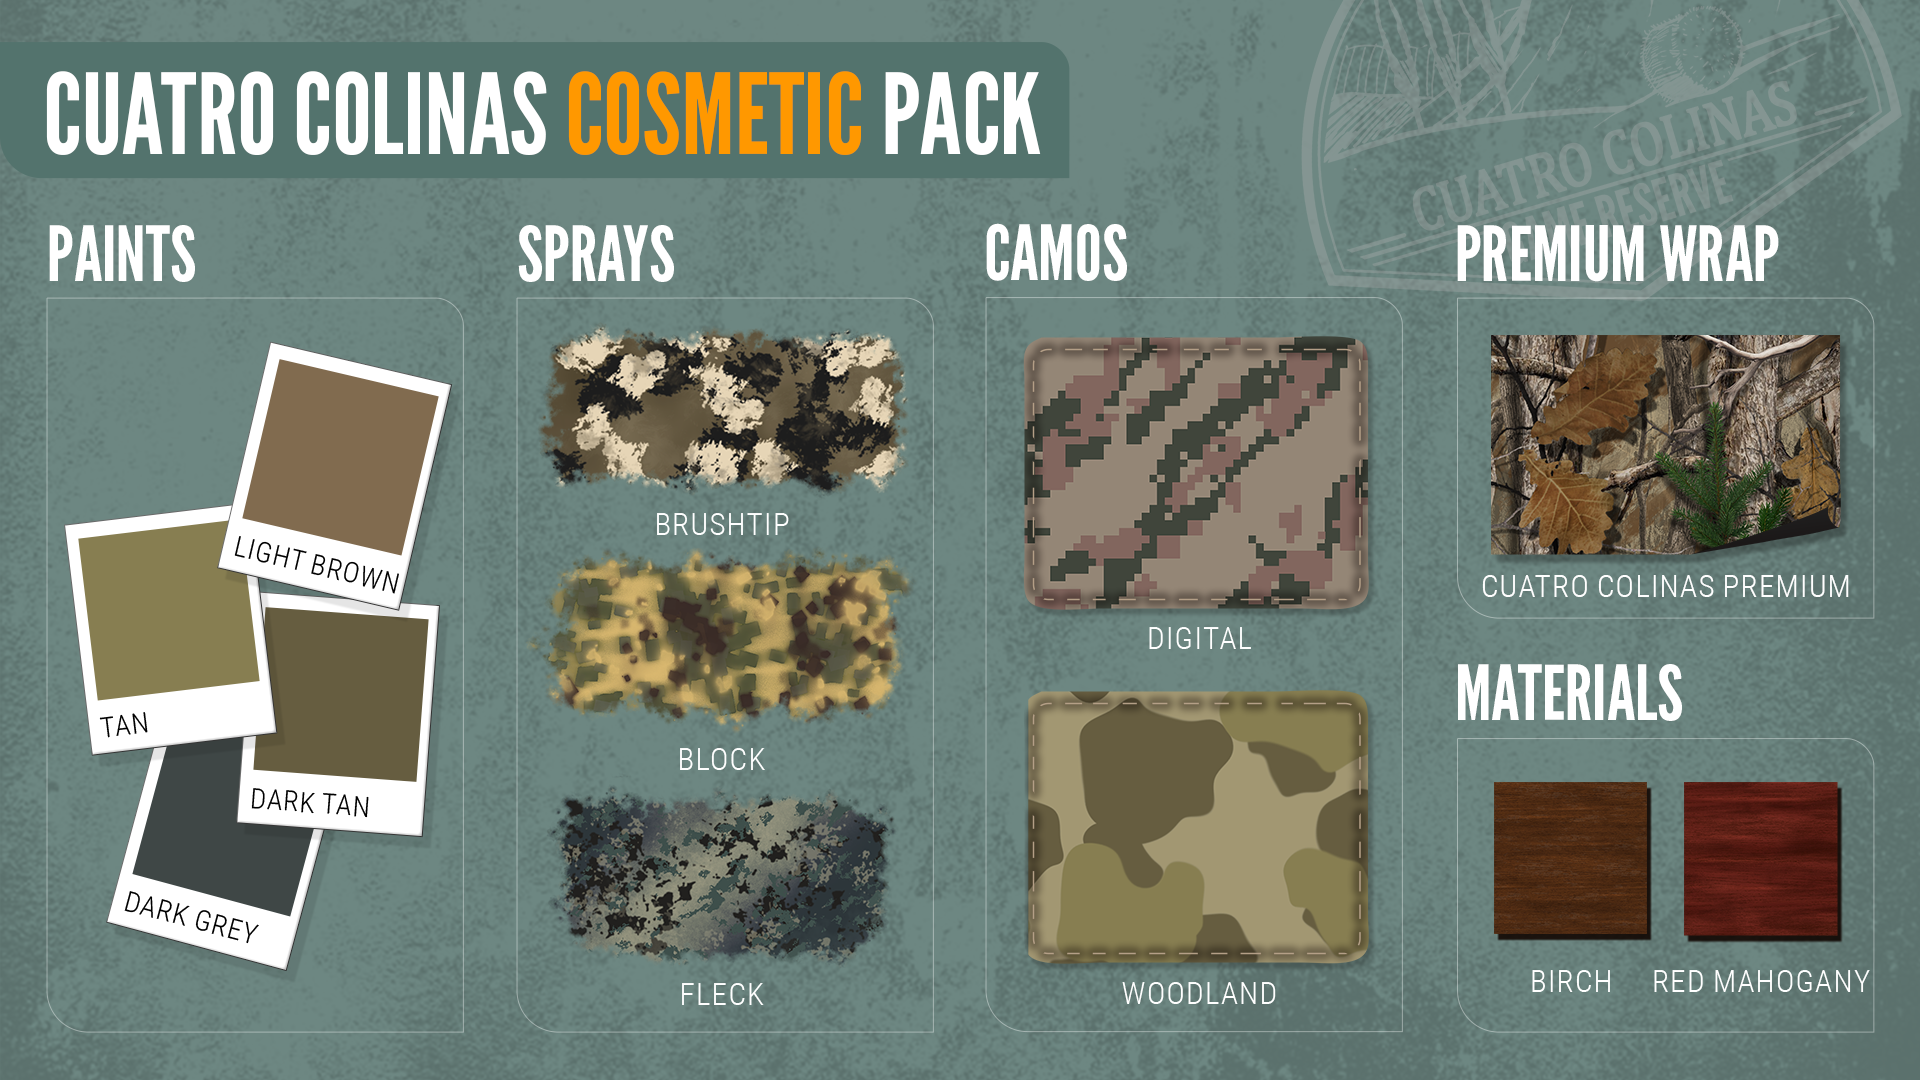 Cuatro Colinas Cosmetic Pack Infographic